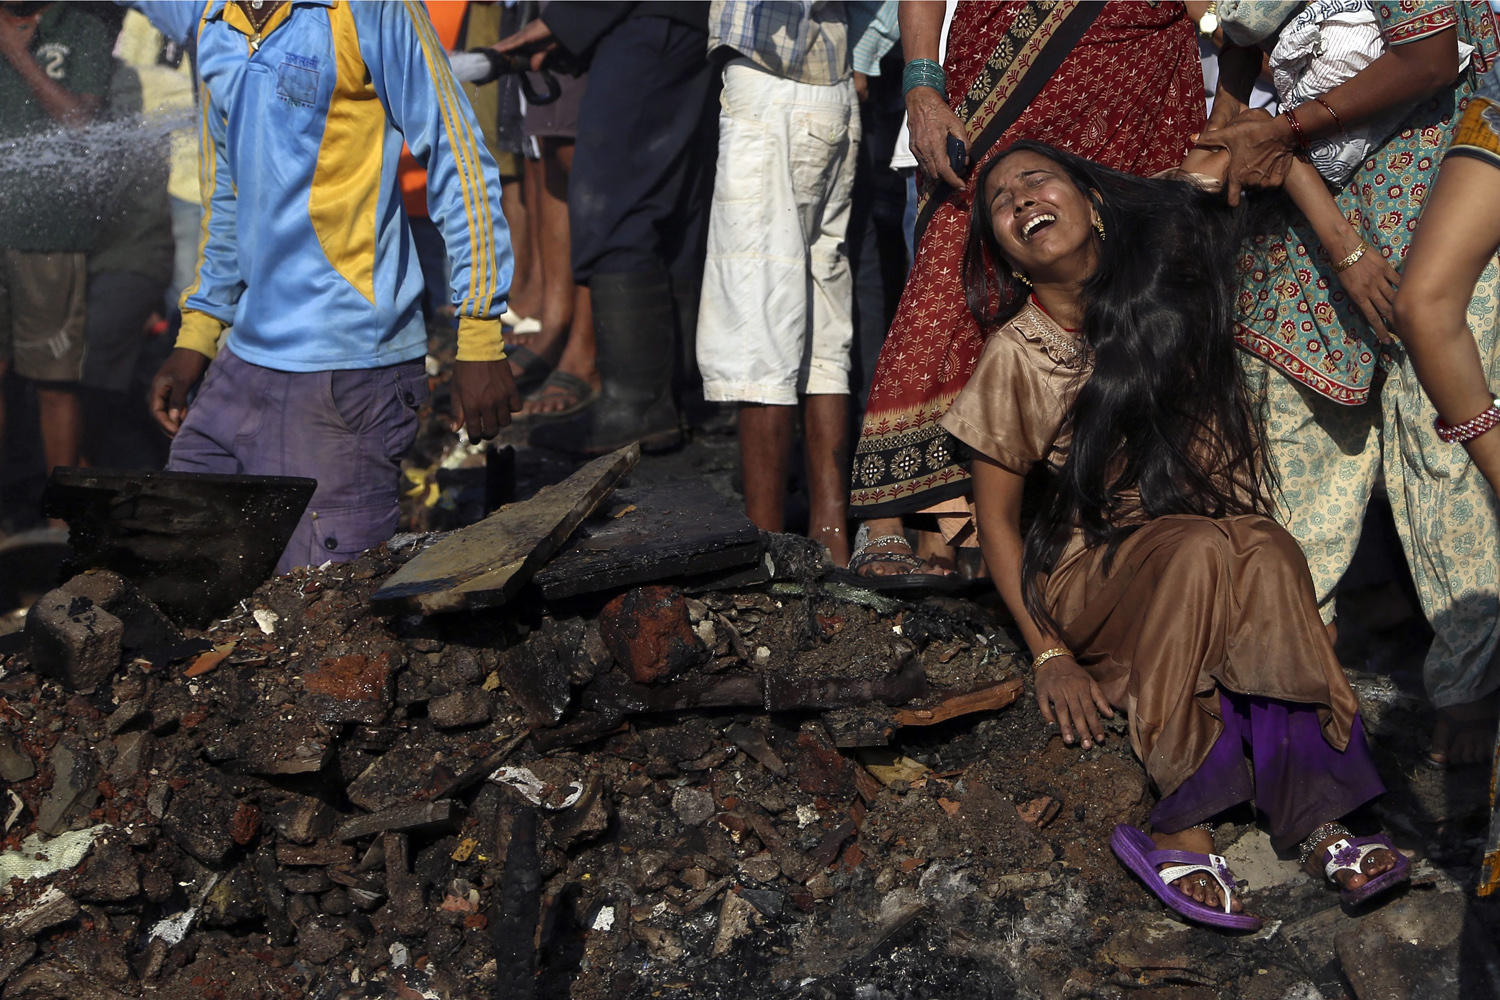 Nov. 21, 2013. An Indian woman cries while her baby is missing after a fire in Ambedkar Nagar slum in Mumbai, India,  No casualties have been reported.